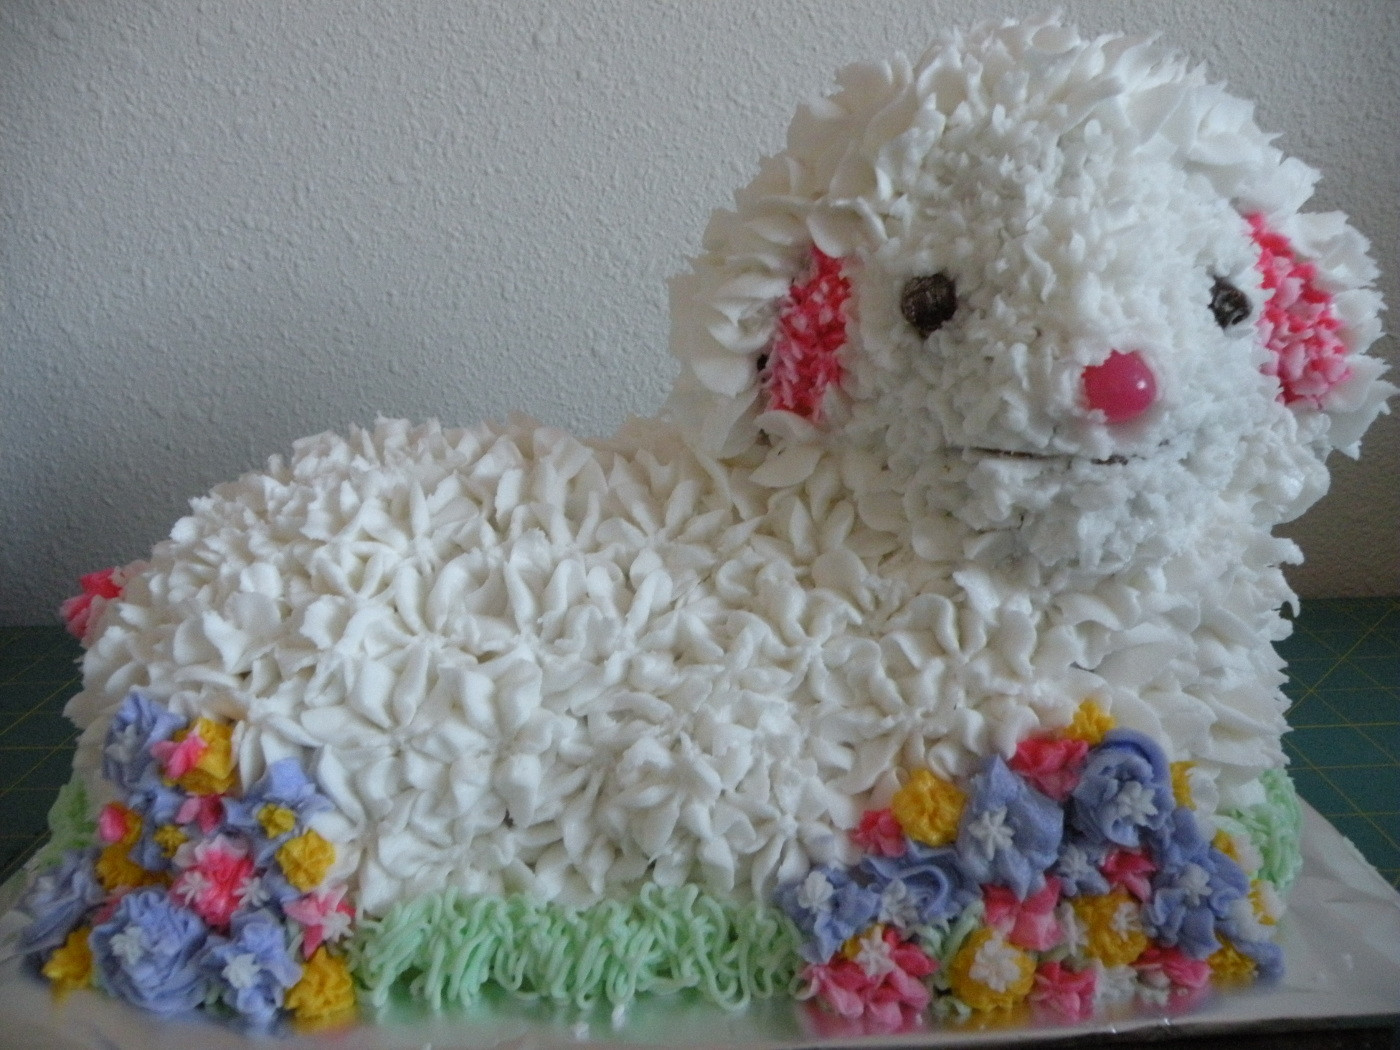 Easter Lamb Decorations
 A Busy Easter Weekend Lamb Cake Decorating Quilt With Us